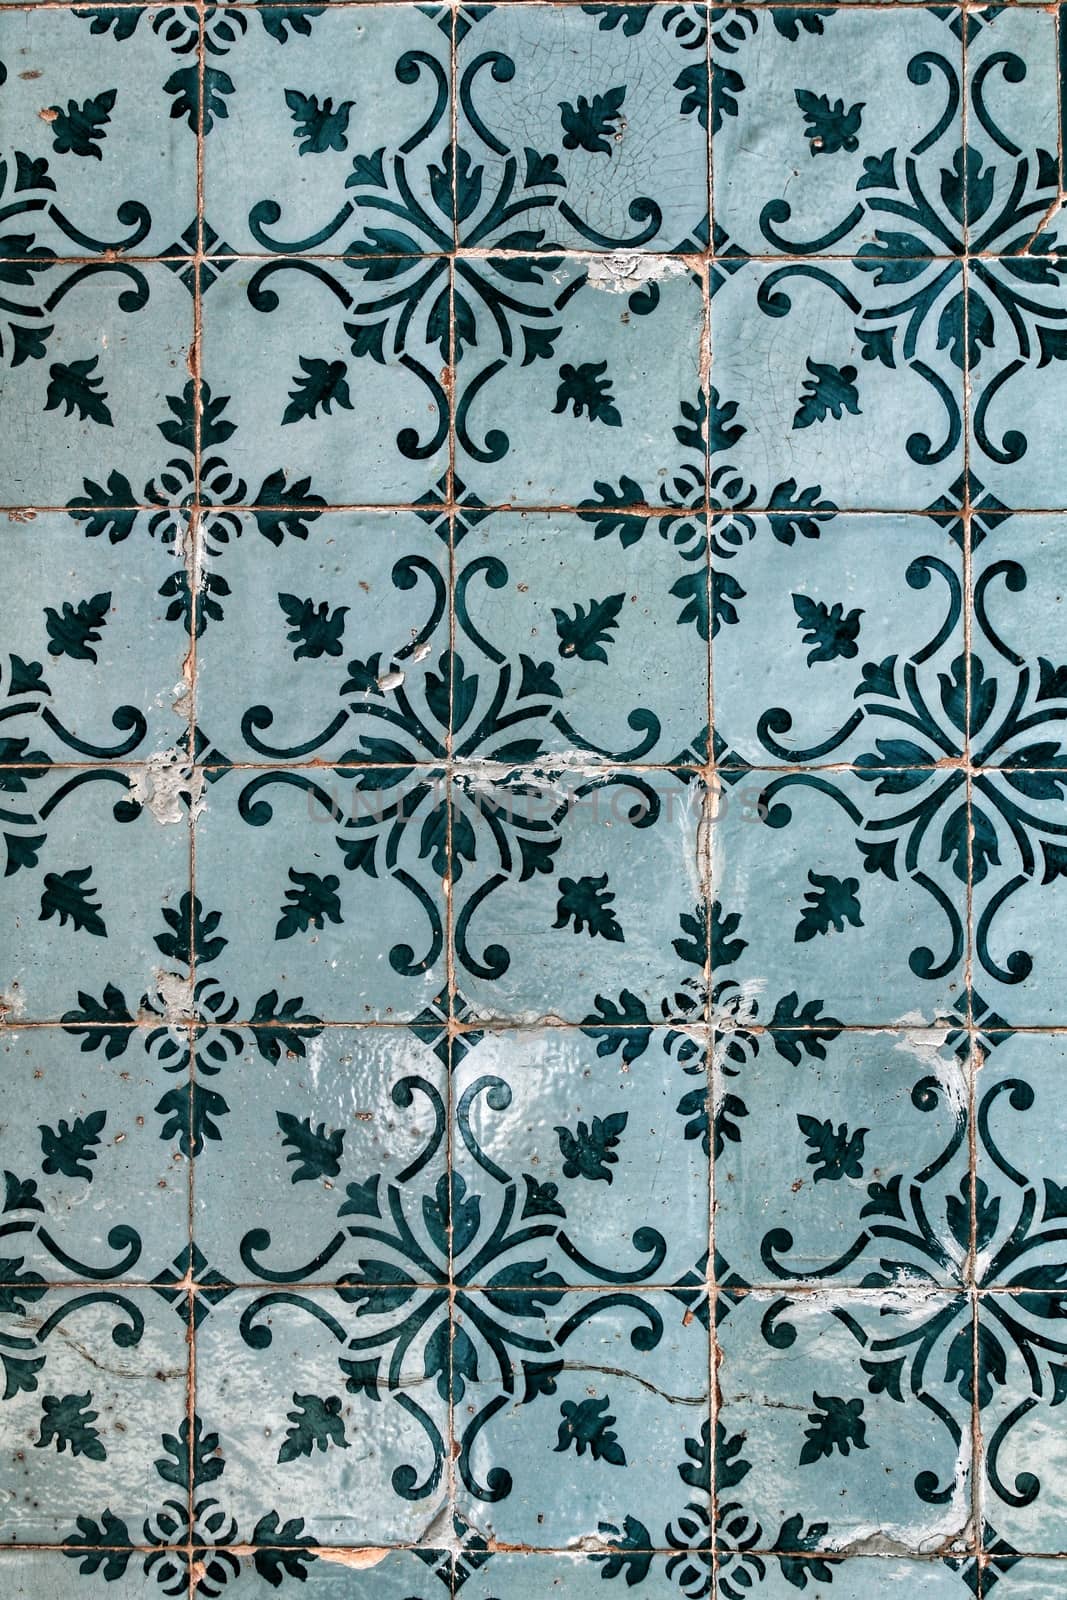 Colorful tiles of Lisbon by soniabonet